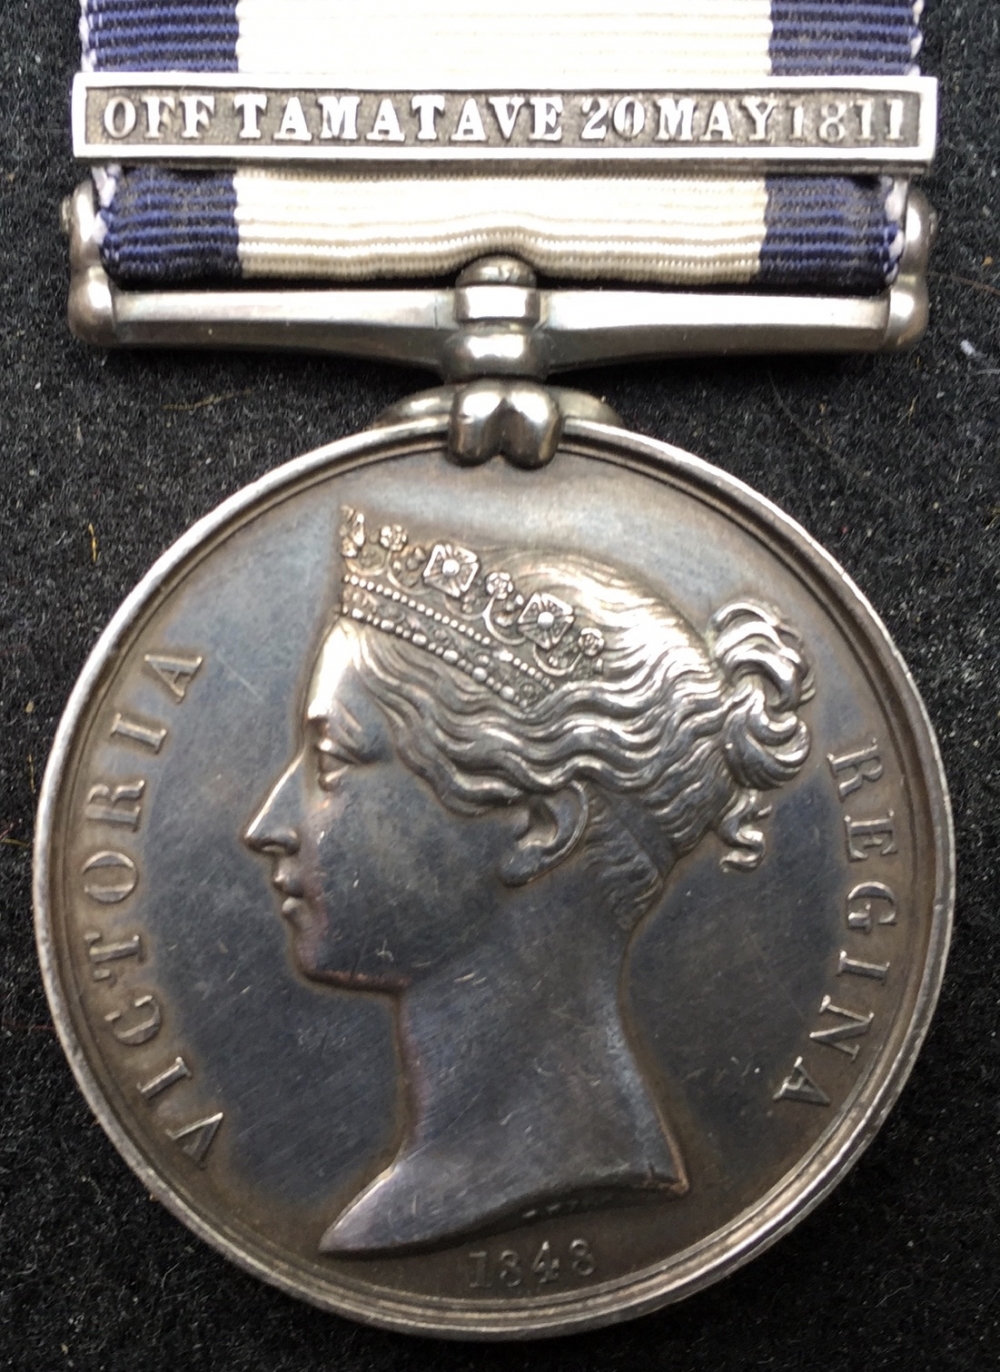 A Rare & Desirable NAVAL GENERAL SERVICE MEDAL [OFF TAMATAVE 20